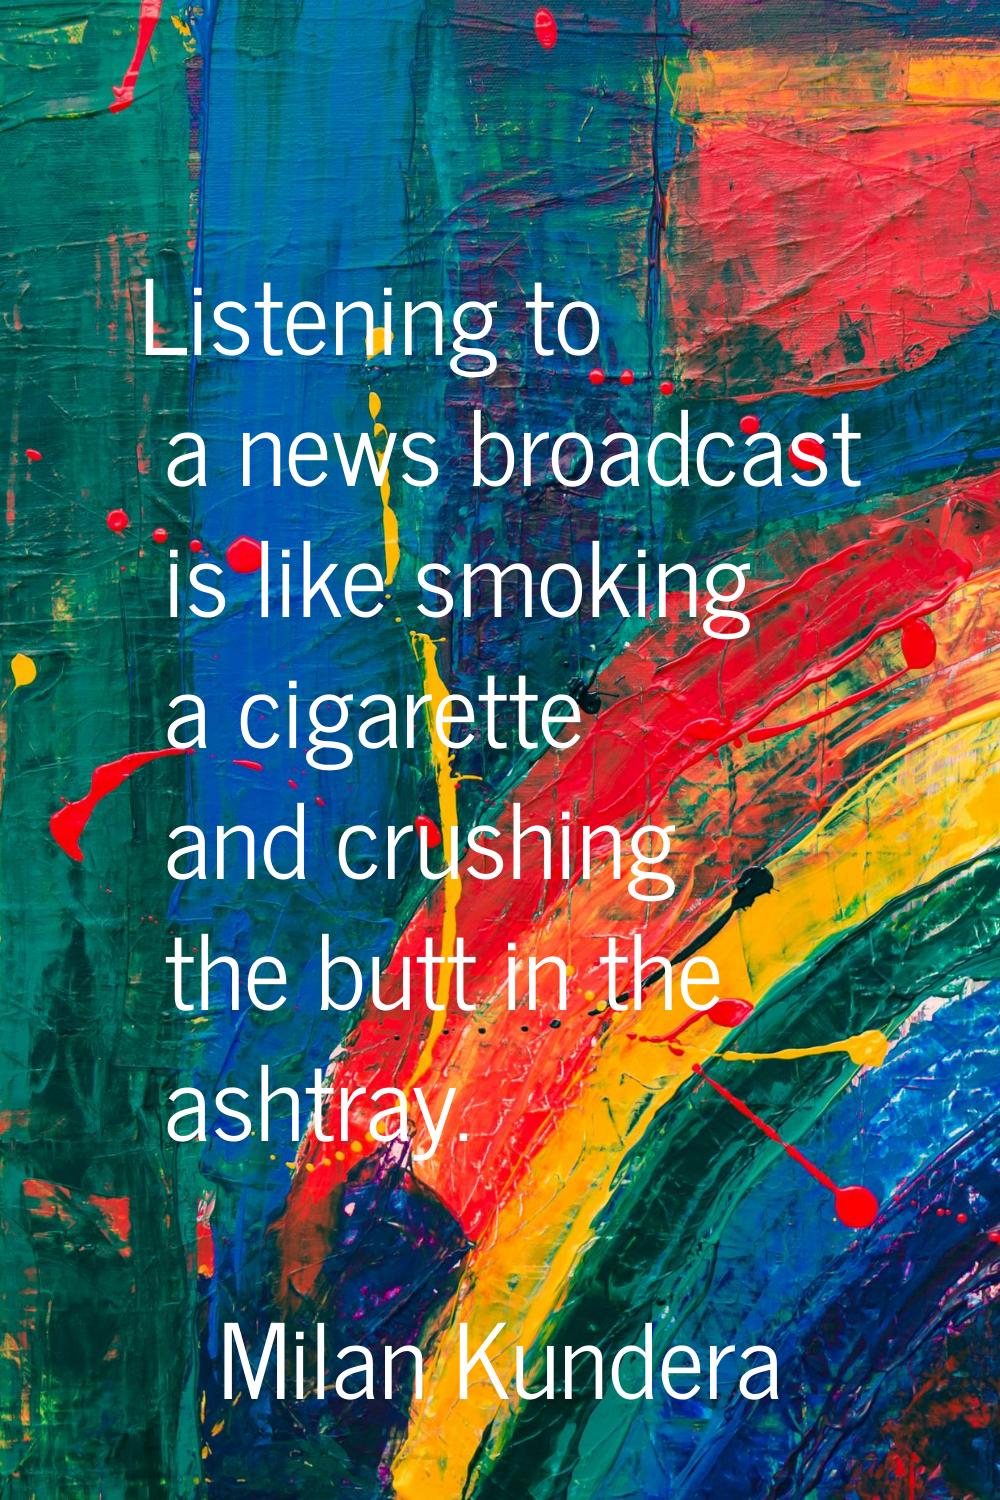 Listening to a news broadcast is like smoking a cigarette and crushing the butt in the ashtray.